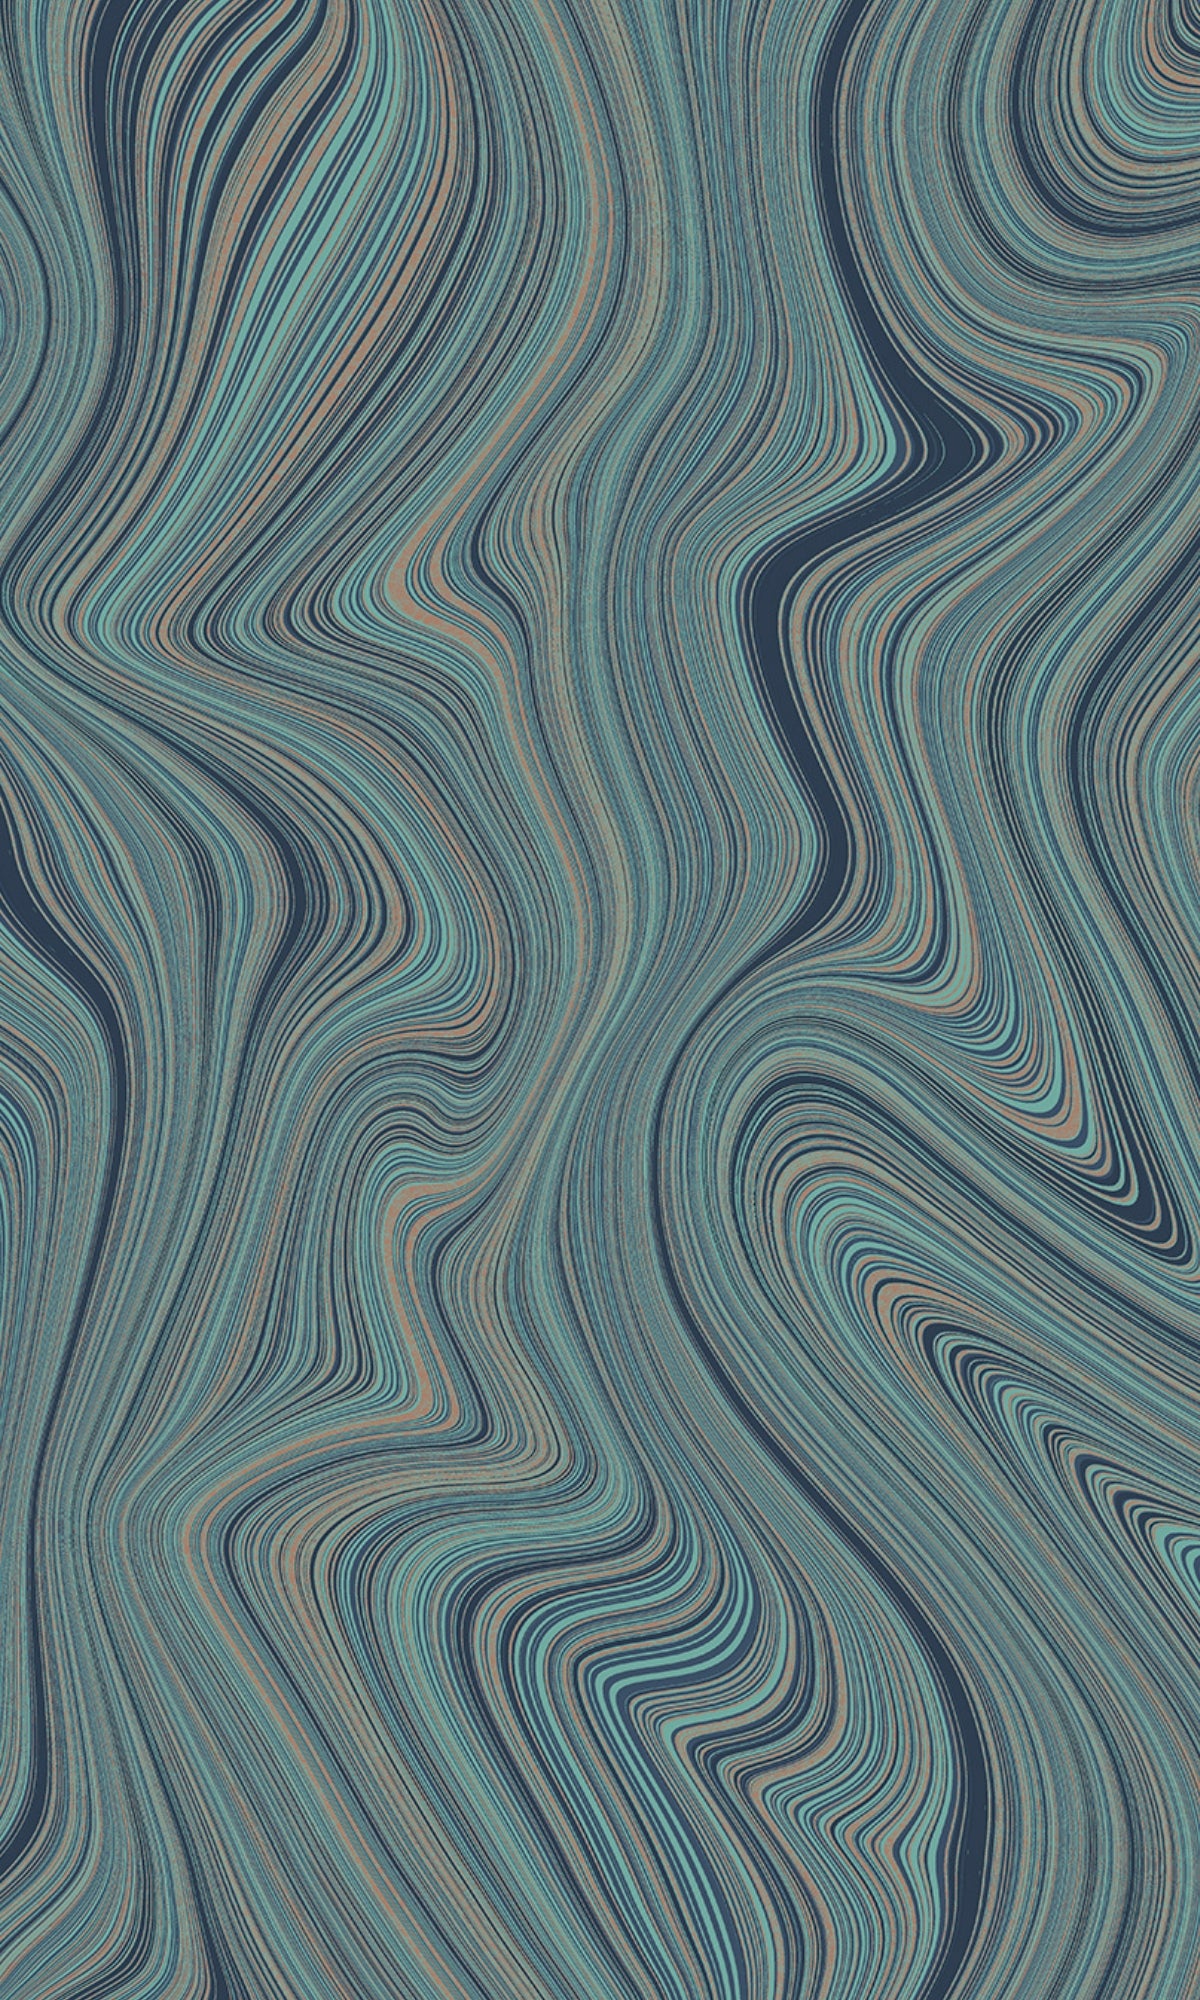 Blue Green Abstract Geometric Curve Lines Wallpaper R9187